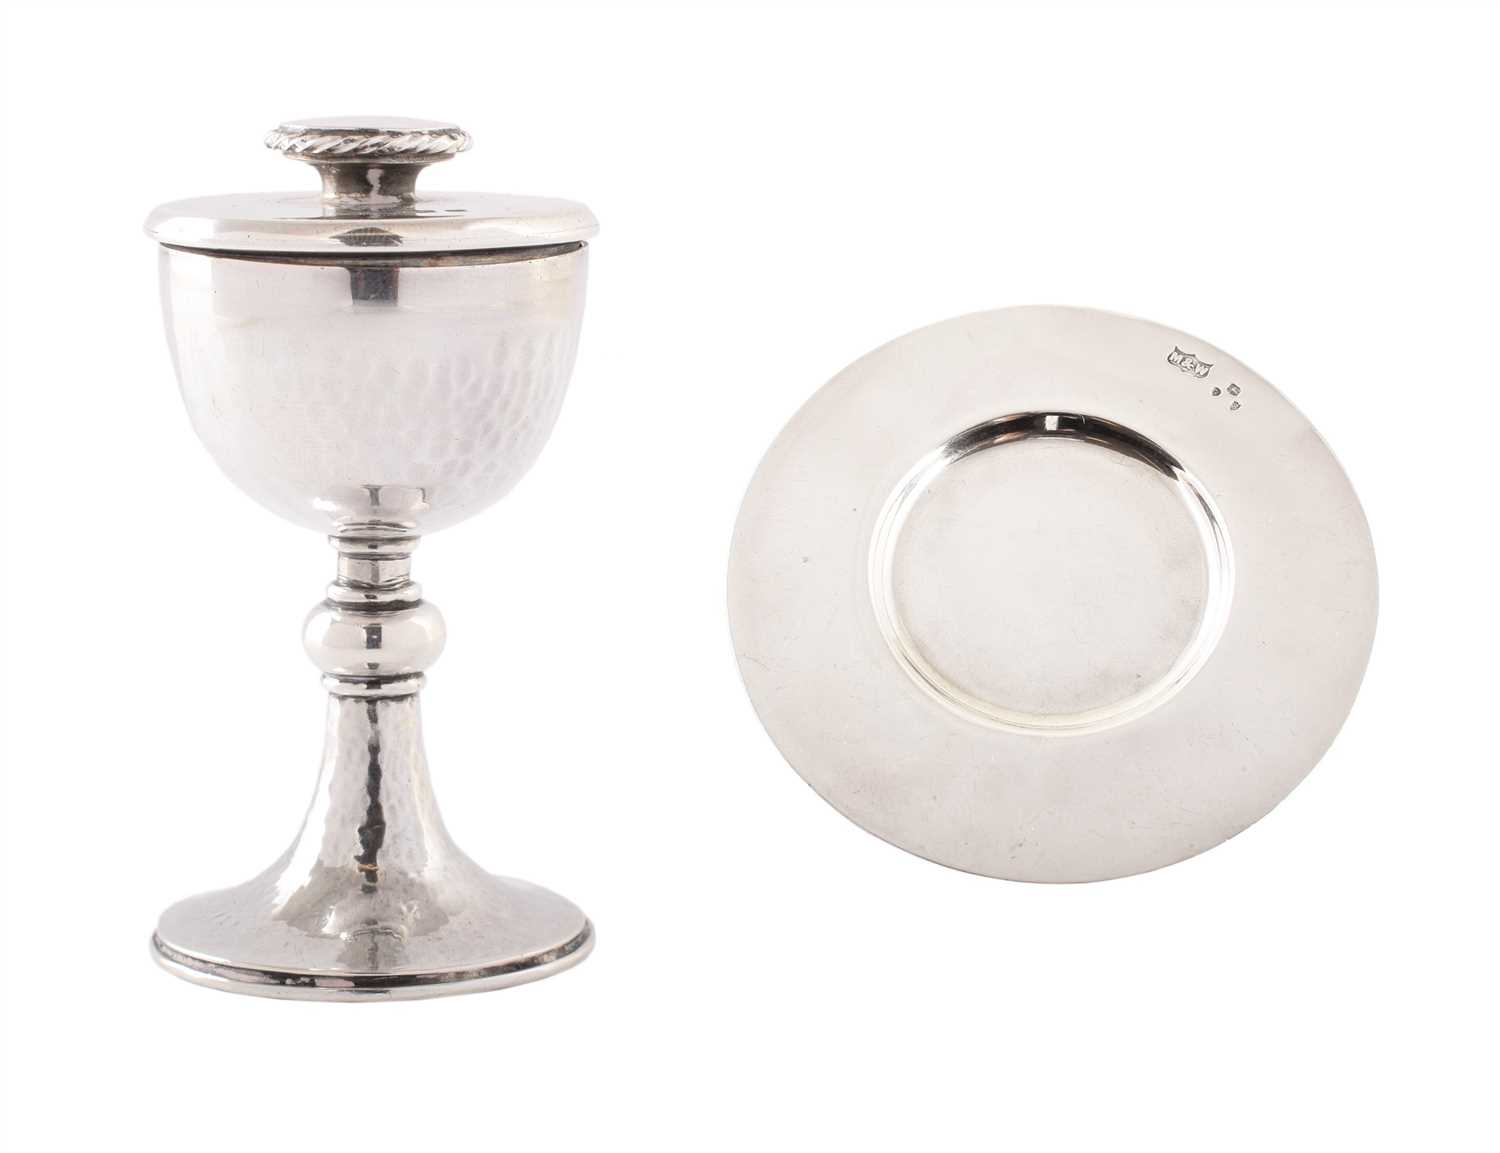 Lot 43 - An early 20th Century silver communion set by Mappin & Webb